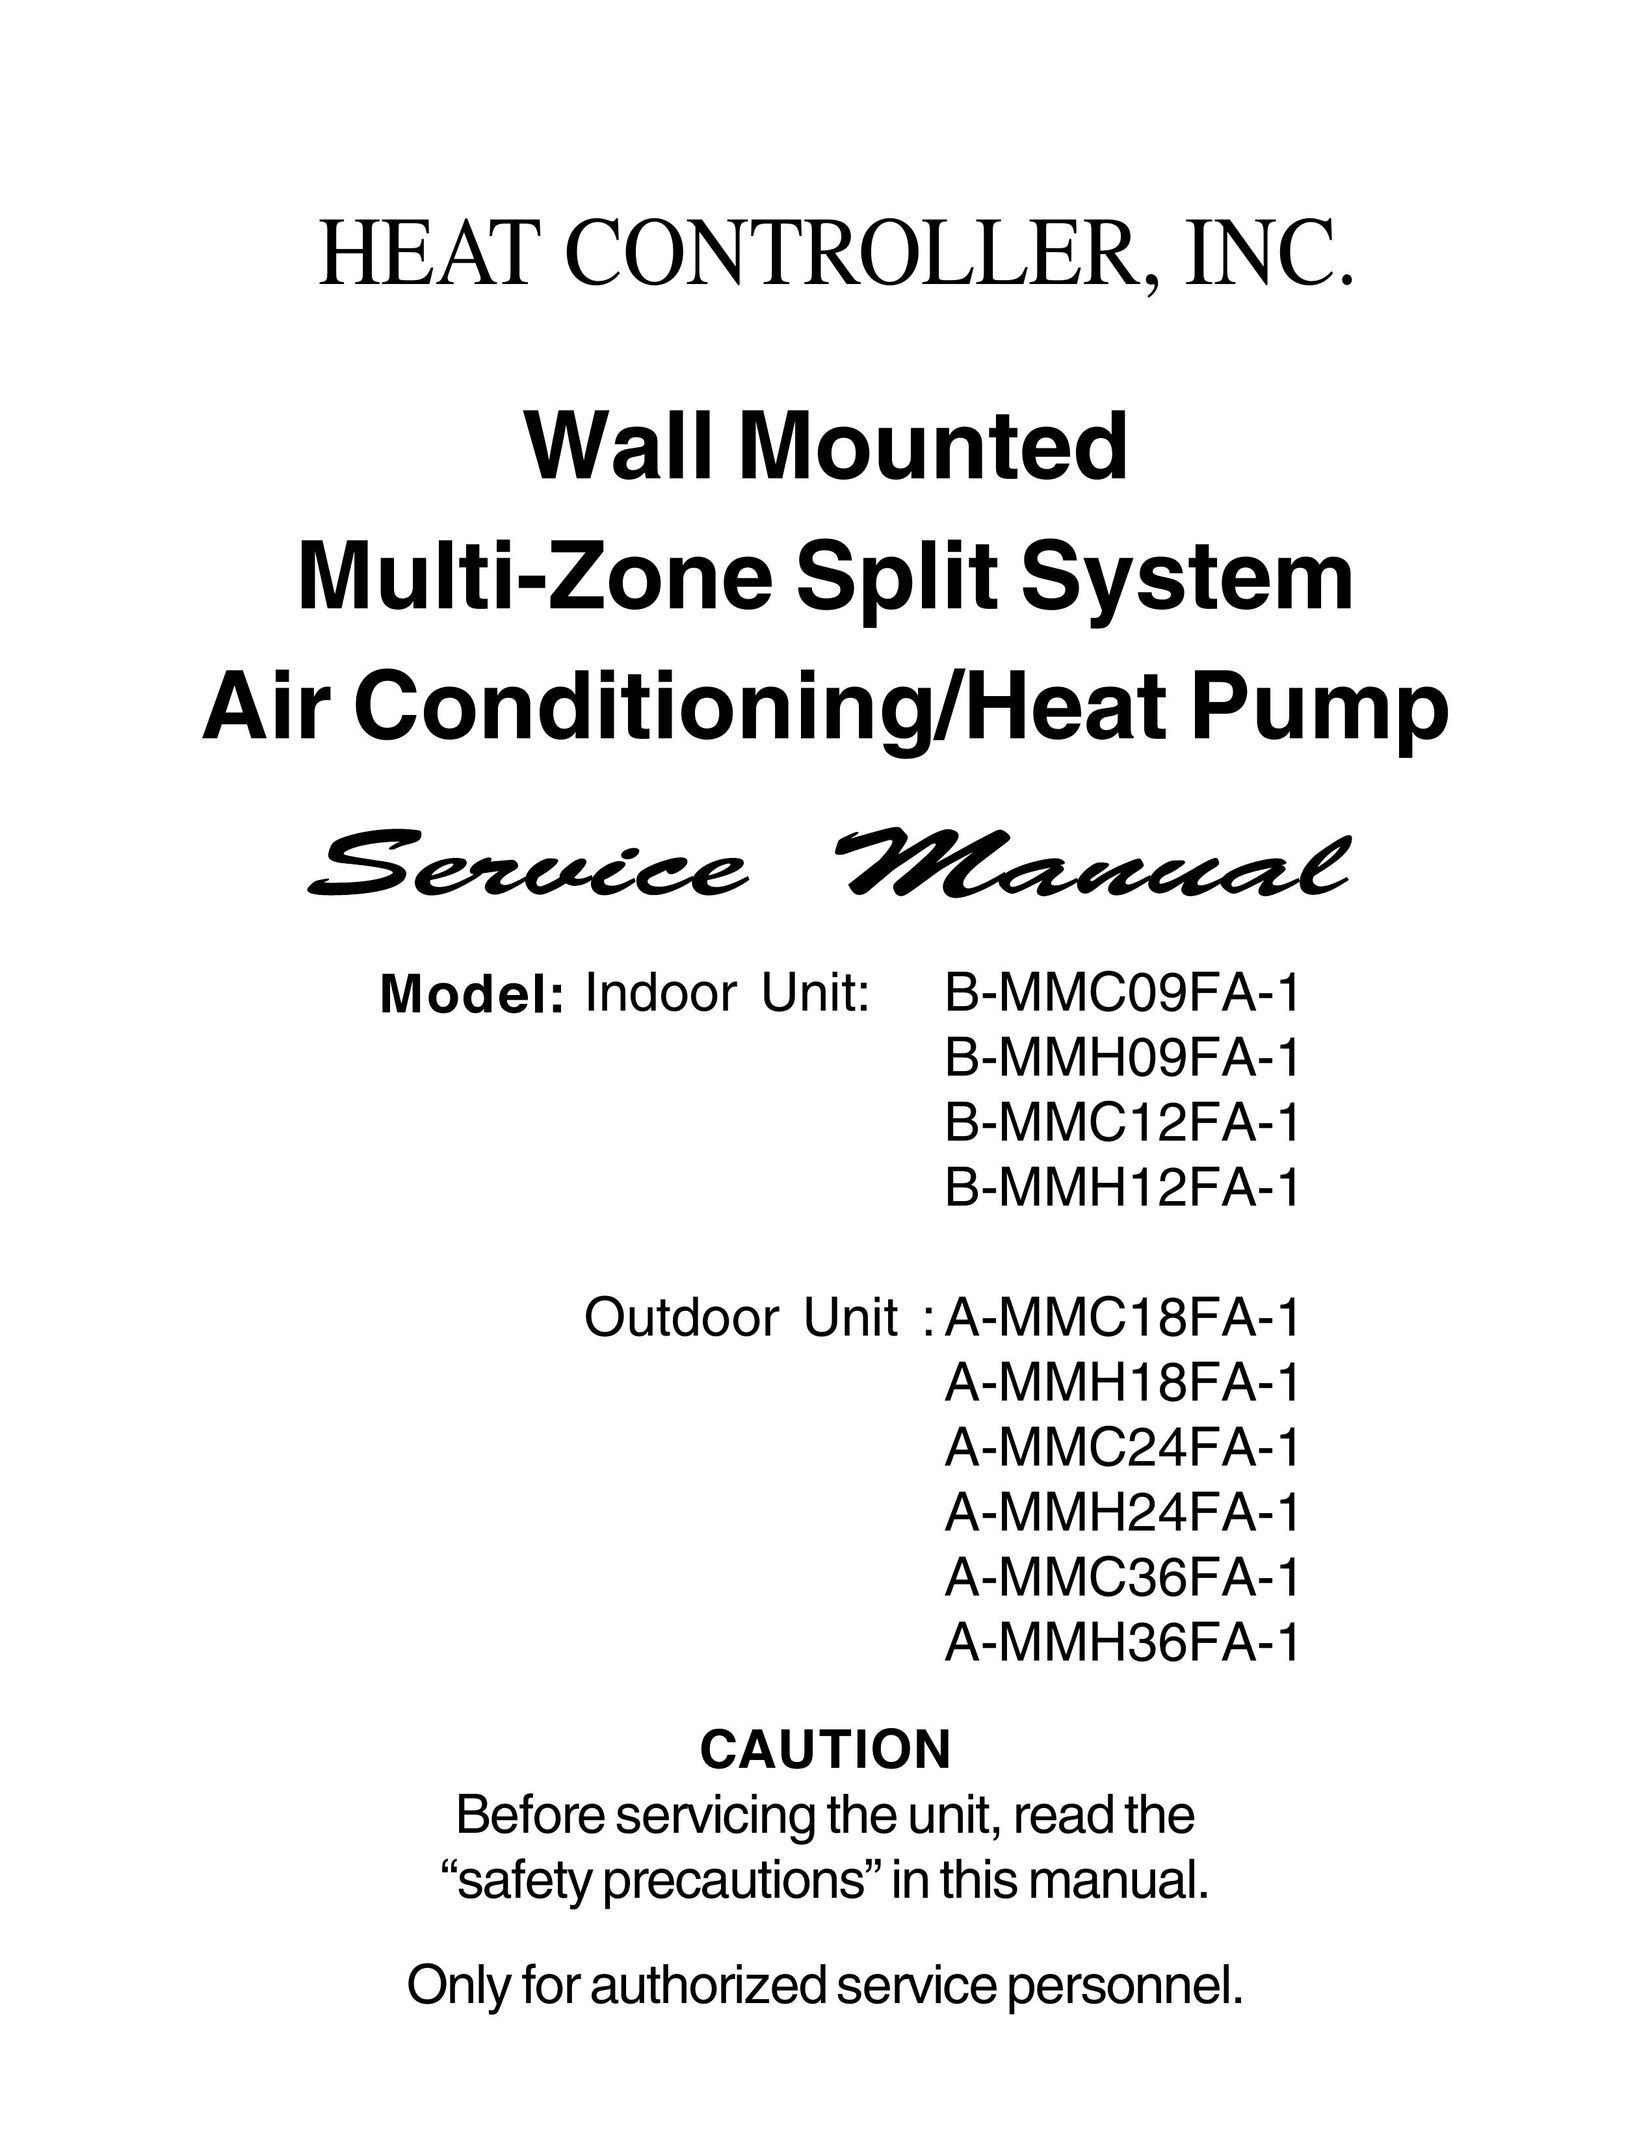 Heat Controller A-MMH36FA-1 Air Conditioner User Manual